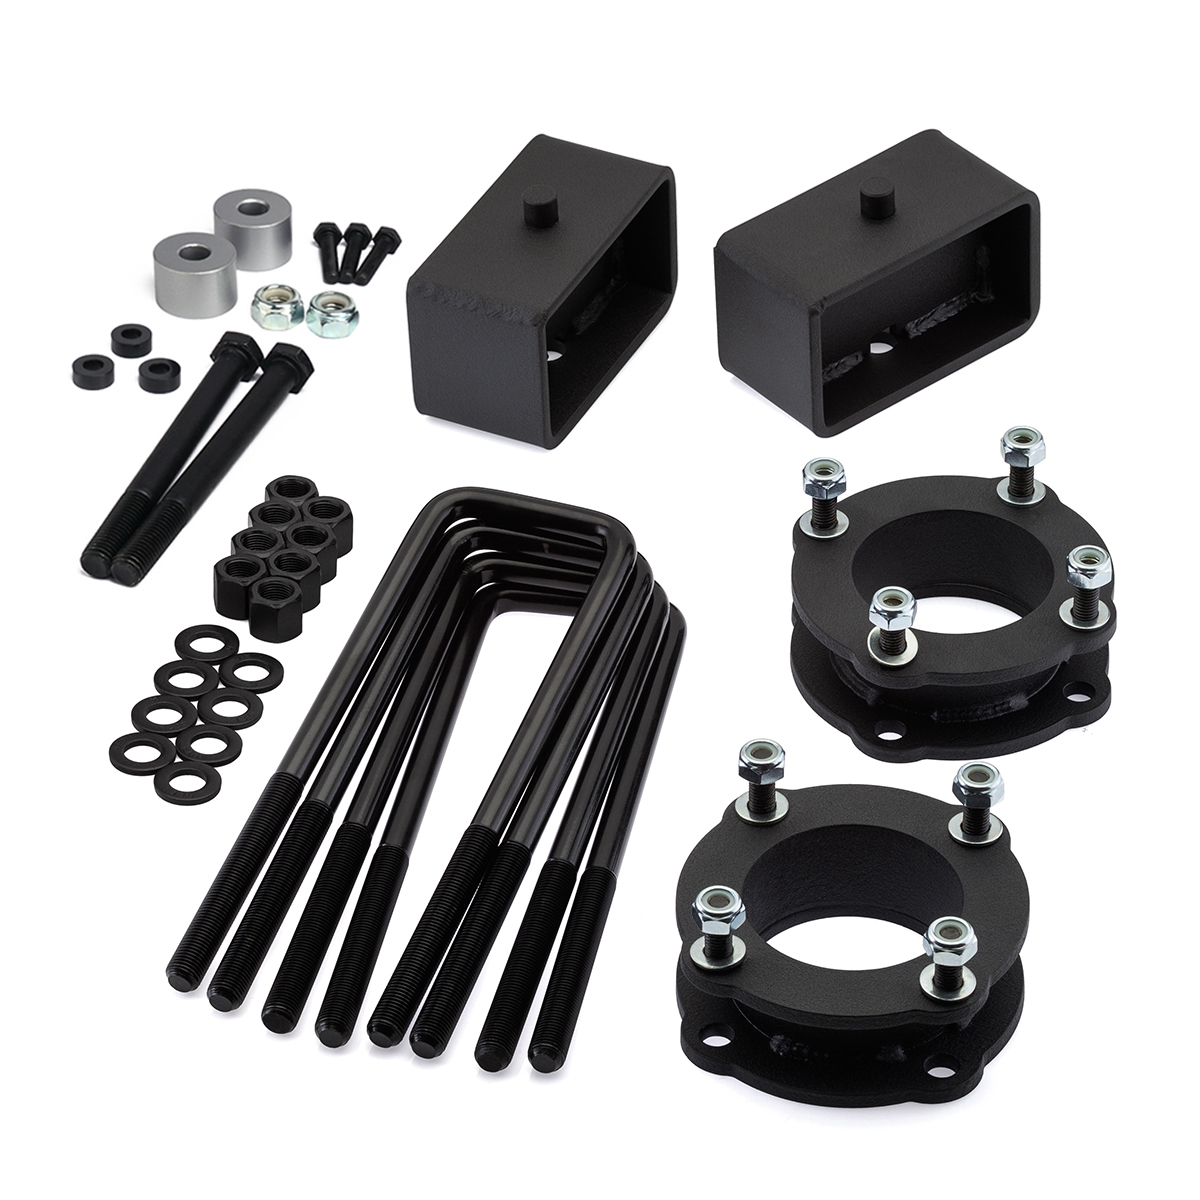 3" Front + 3" Rear Lift Kit For 2007-2020 Toyota Tundra + Differential